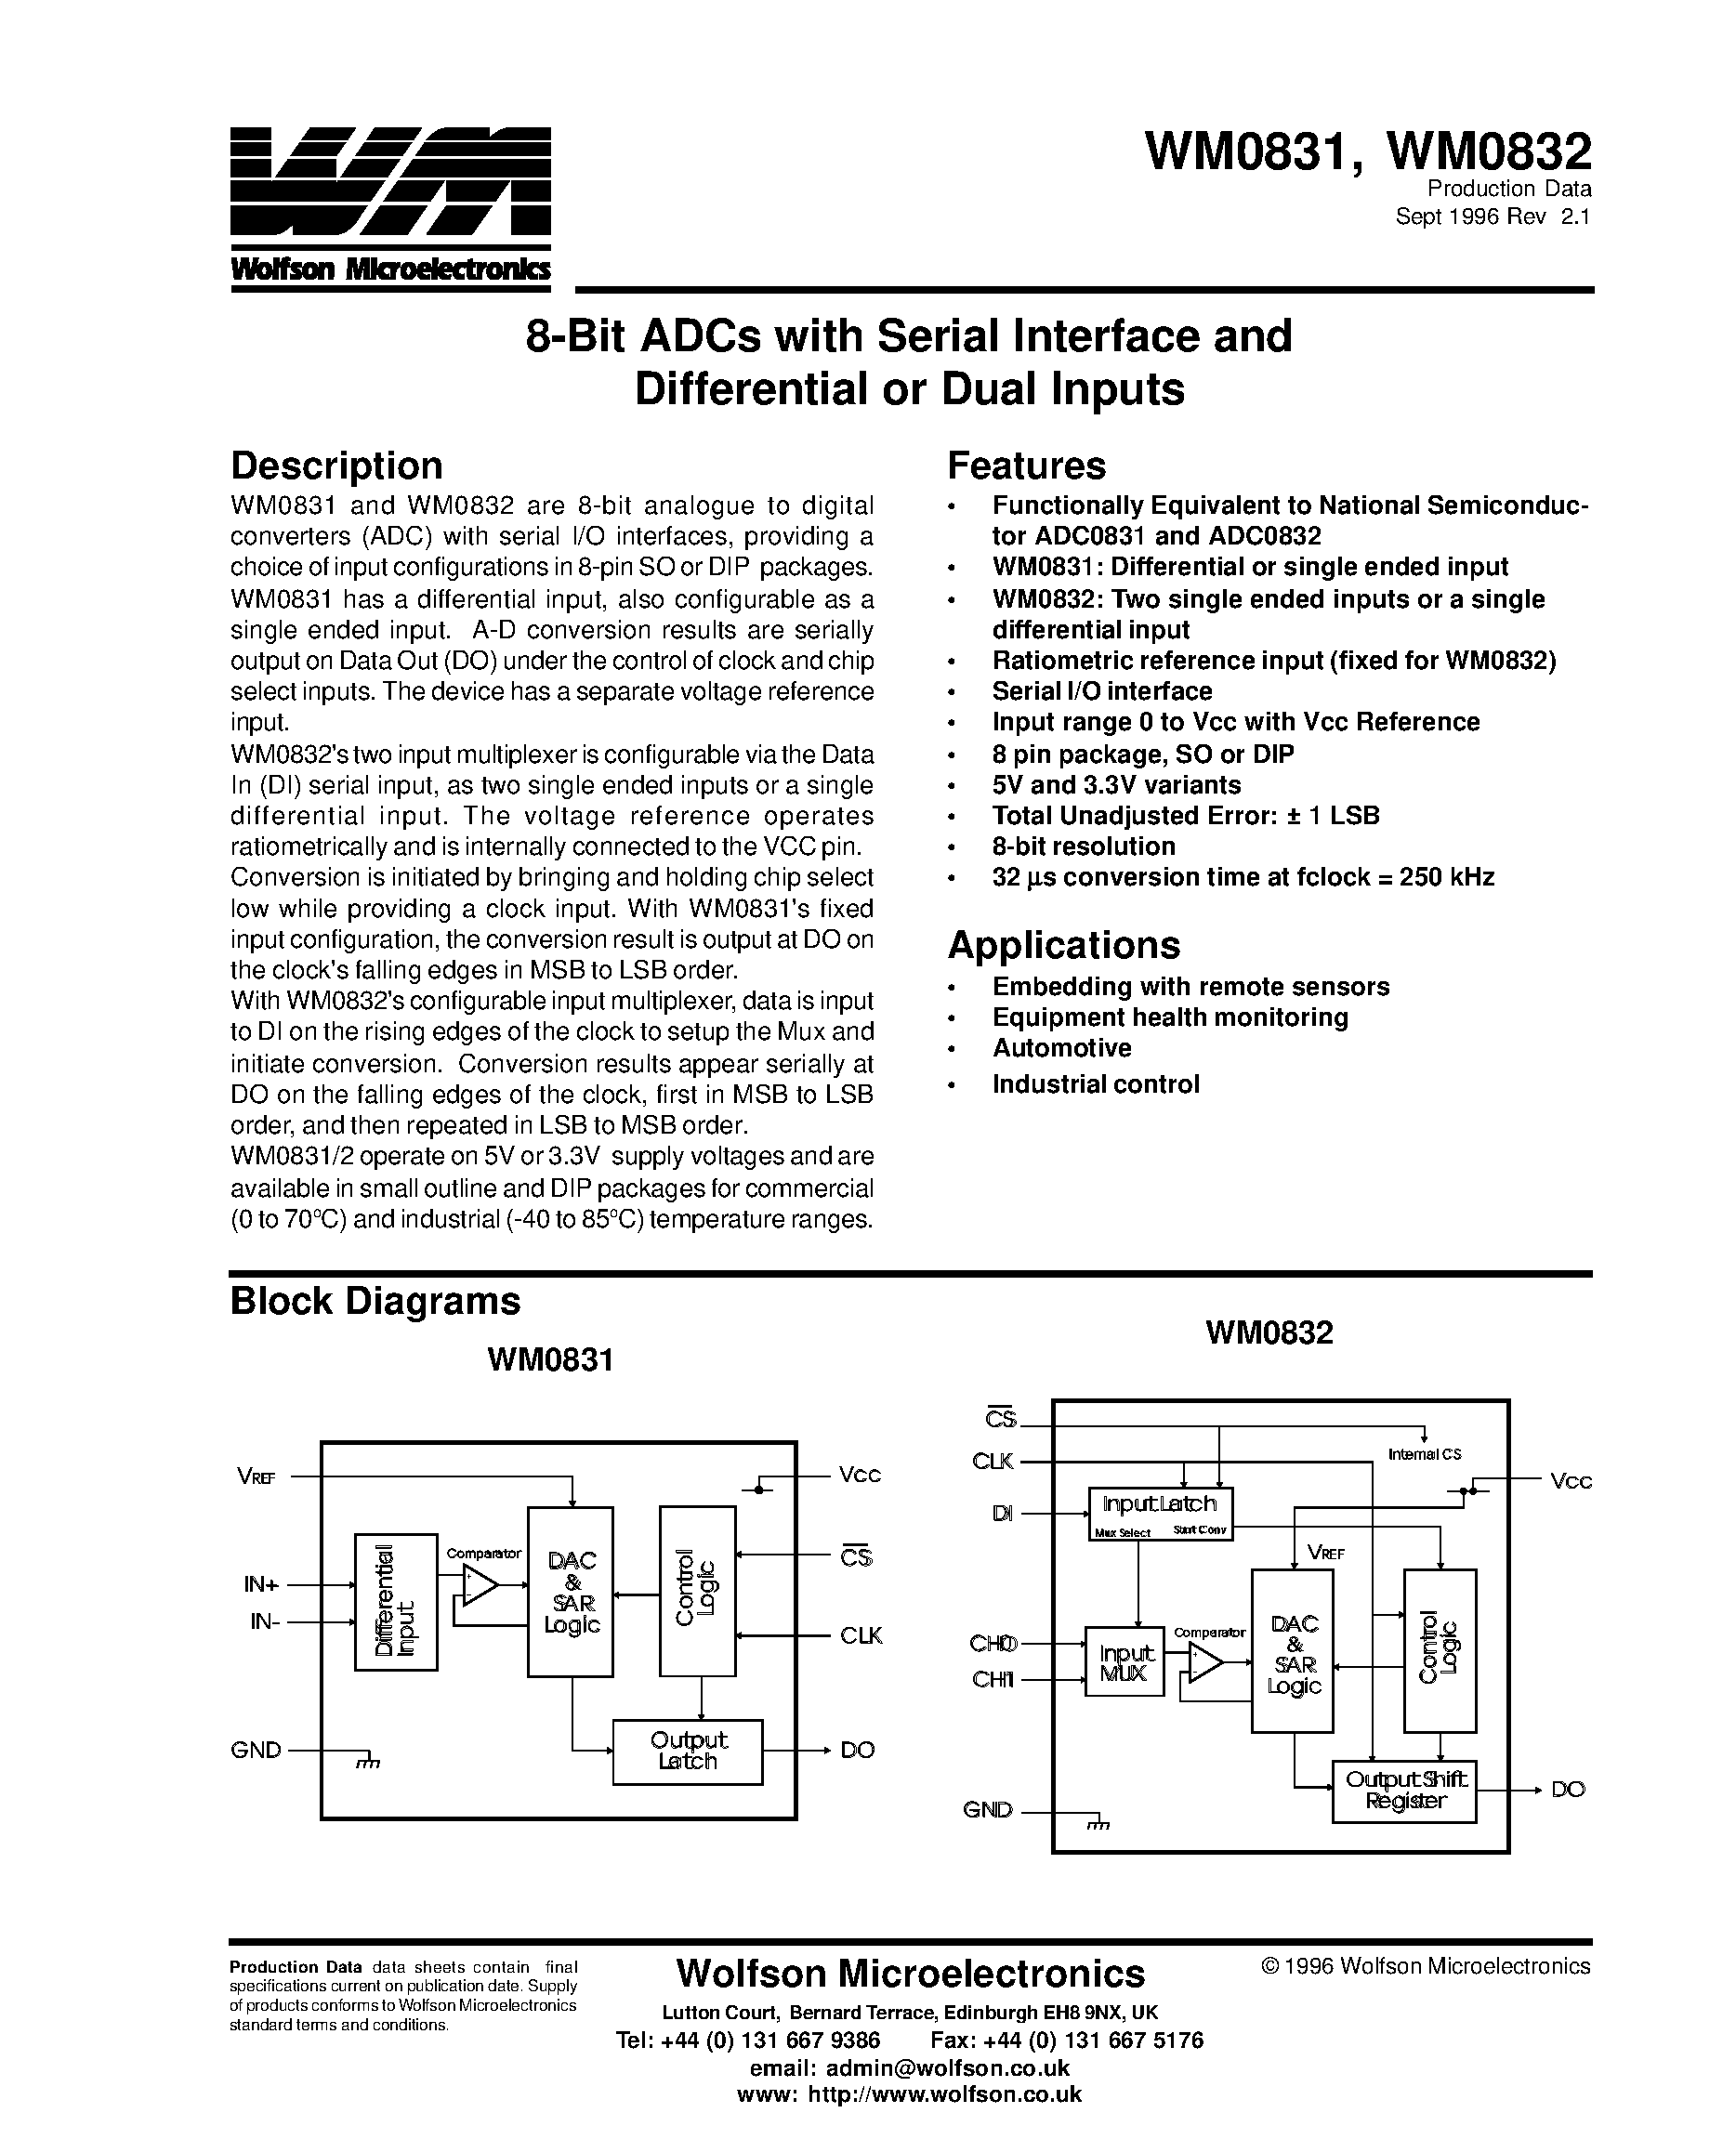 Datasheet WM0832 - 8-Bit ADCs with Serial Interface and Differential or Dual Inputs page 1